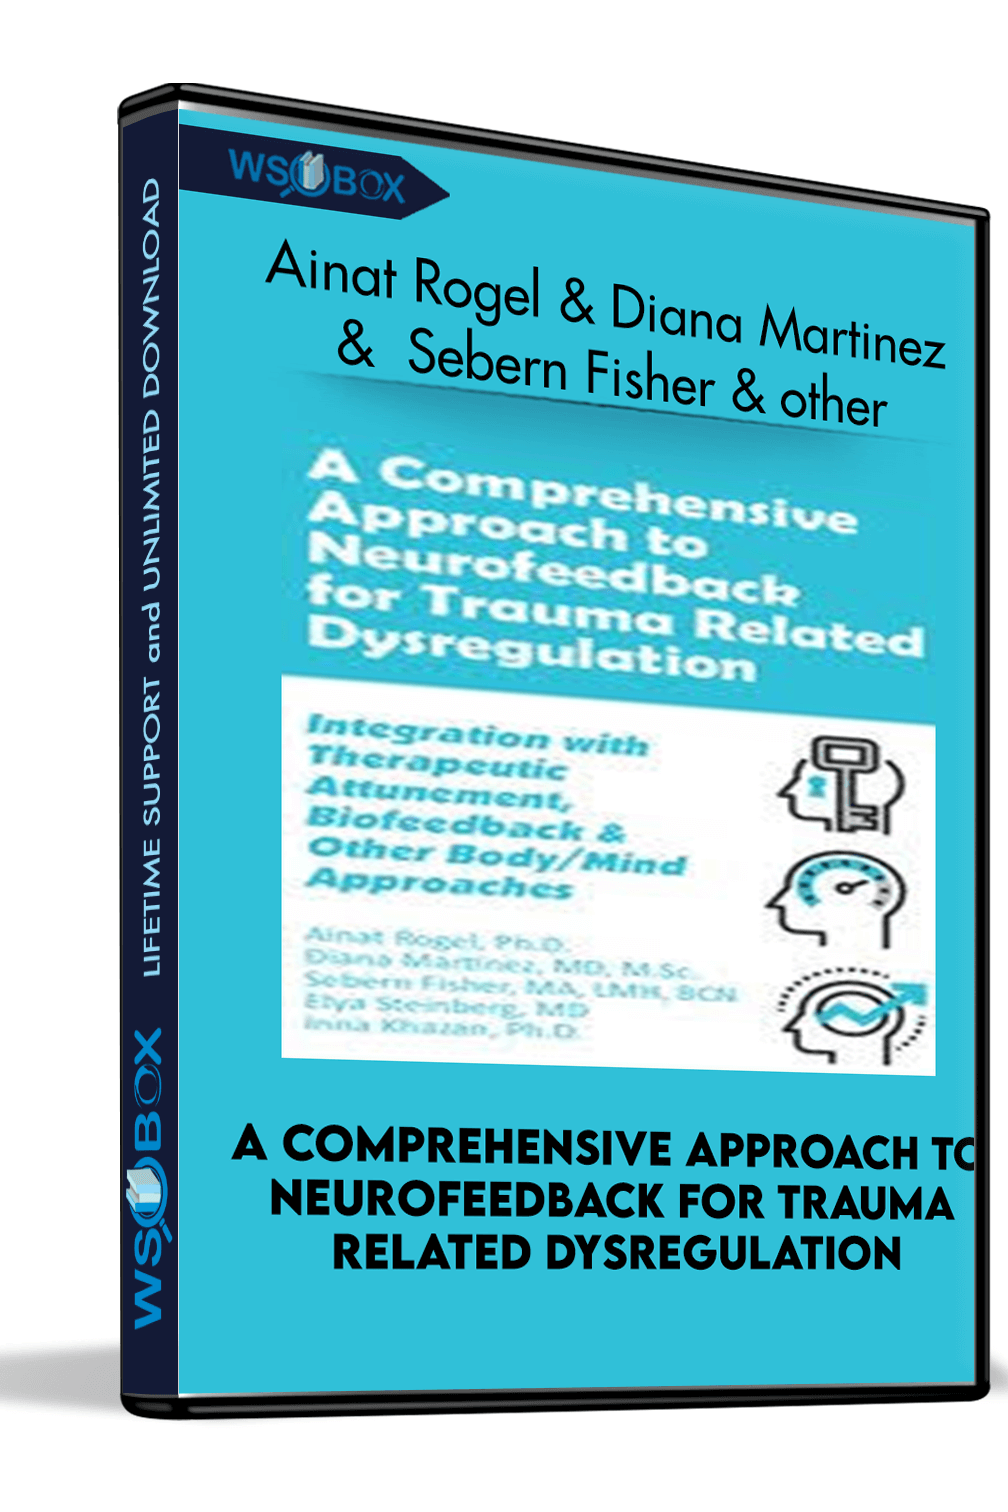 A Comprehensive Approach to Neurofeedback for Trauma Related Dysregulation: Integration with Therapeutic Attunement, Biofeedback & Other Body/Mind Approaches *Pre-Order* – Ainat Rogel ,  Diana Martinez ,  Sebern Fisher ,  Elya Steinberg &  Inna Khazan